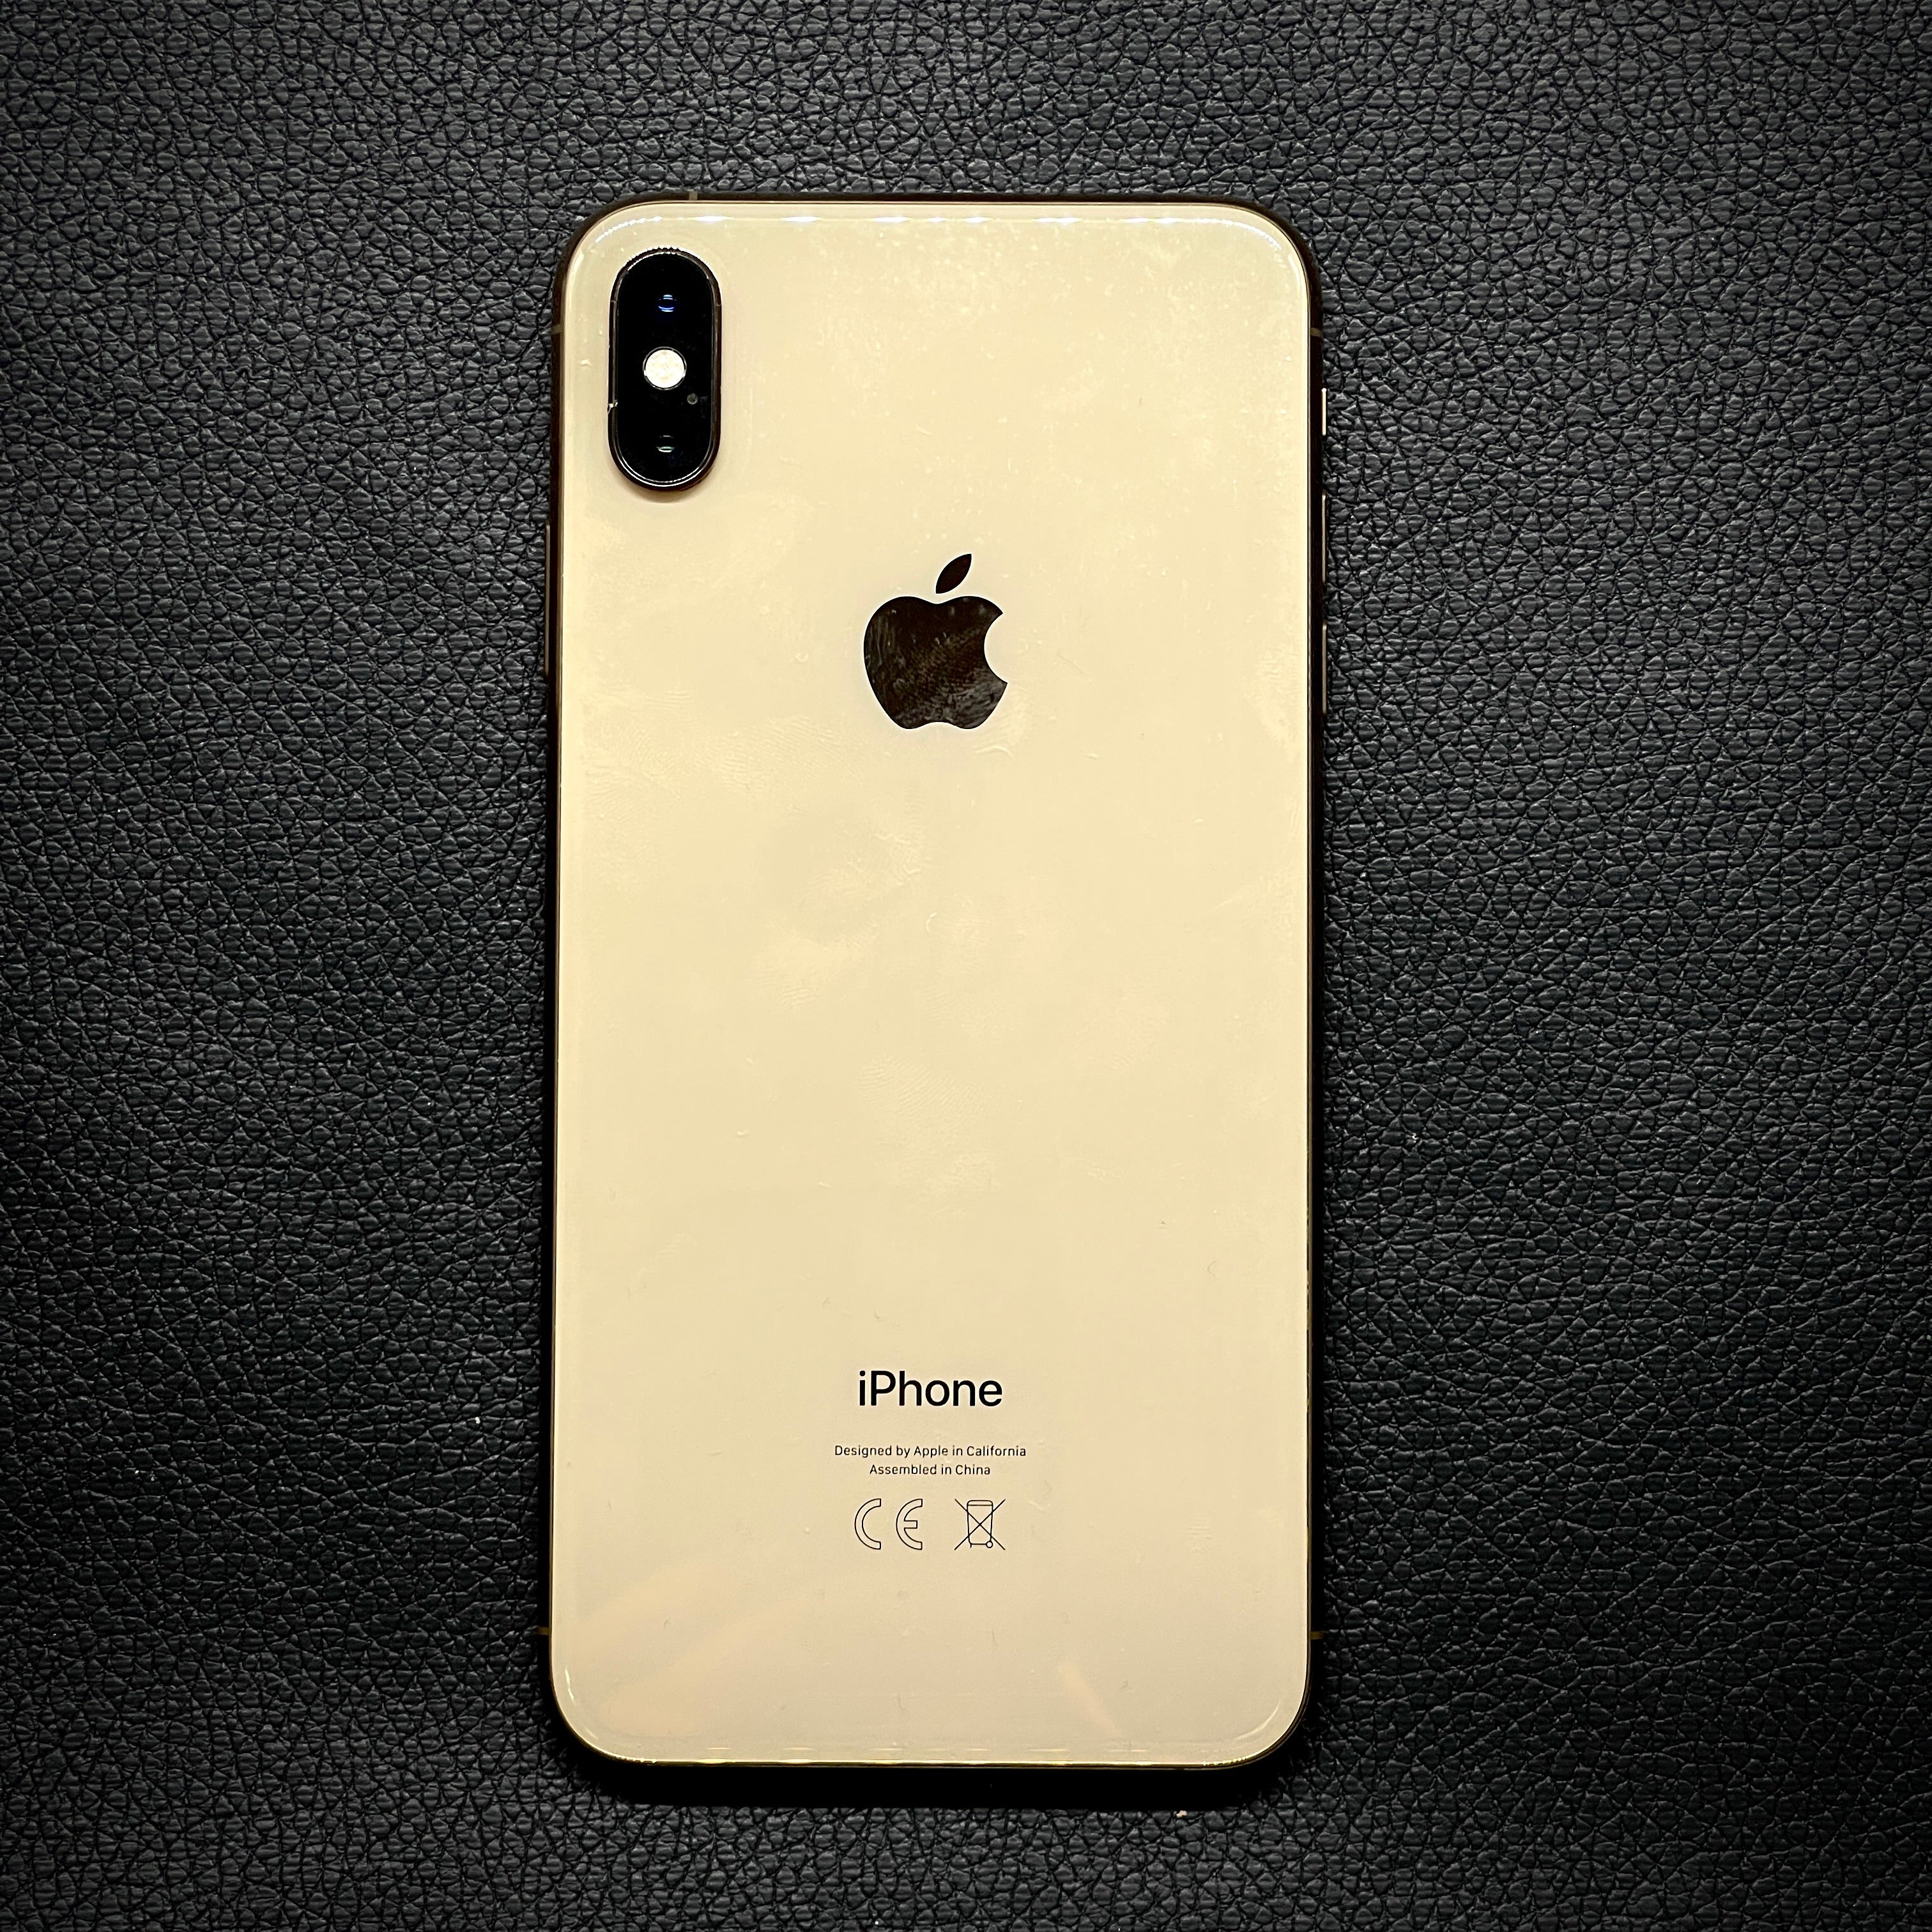 Apple iPhone XS Max (256GB, Gold) - Pre Owned / 3 Month Warranty - Mac Shack